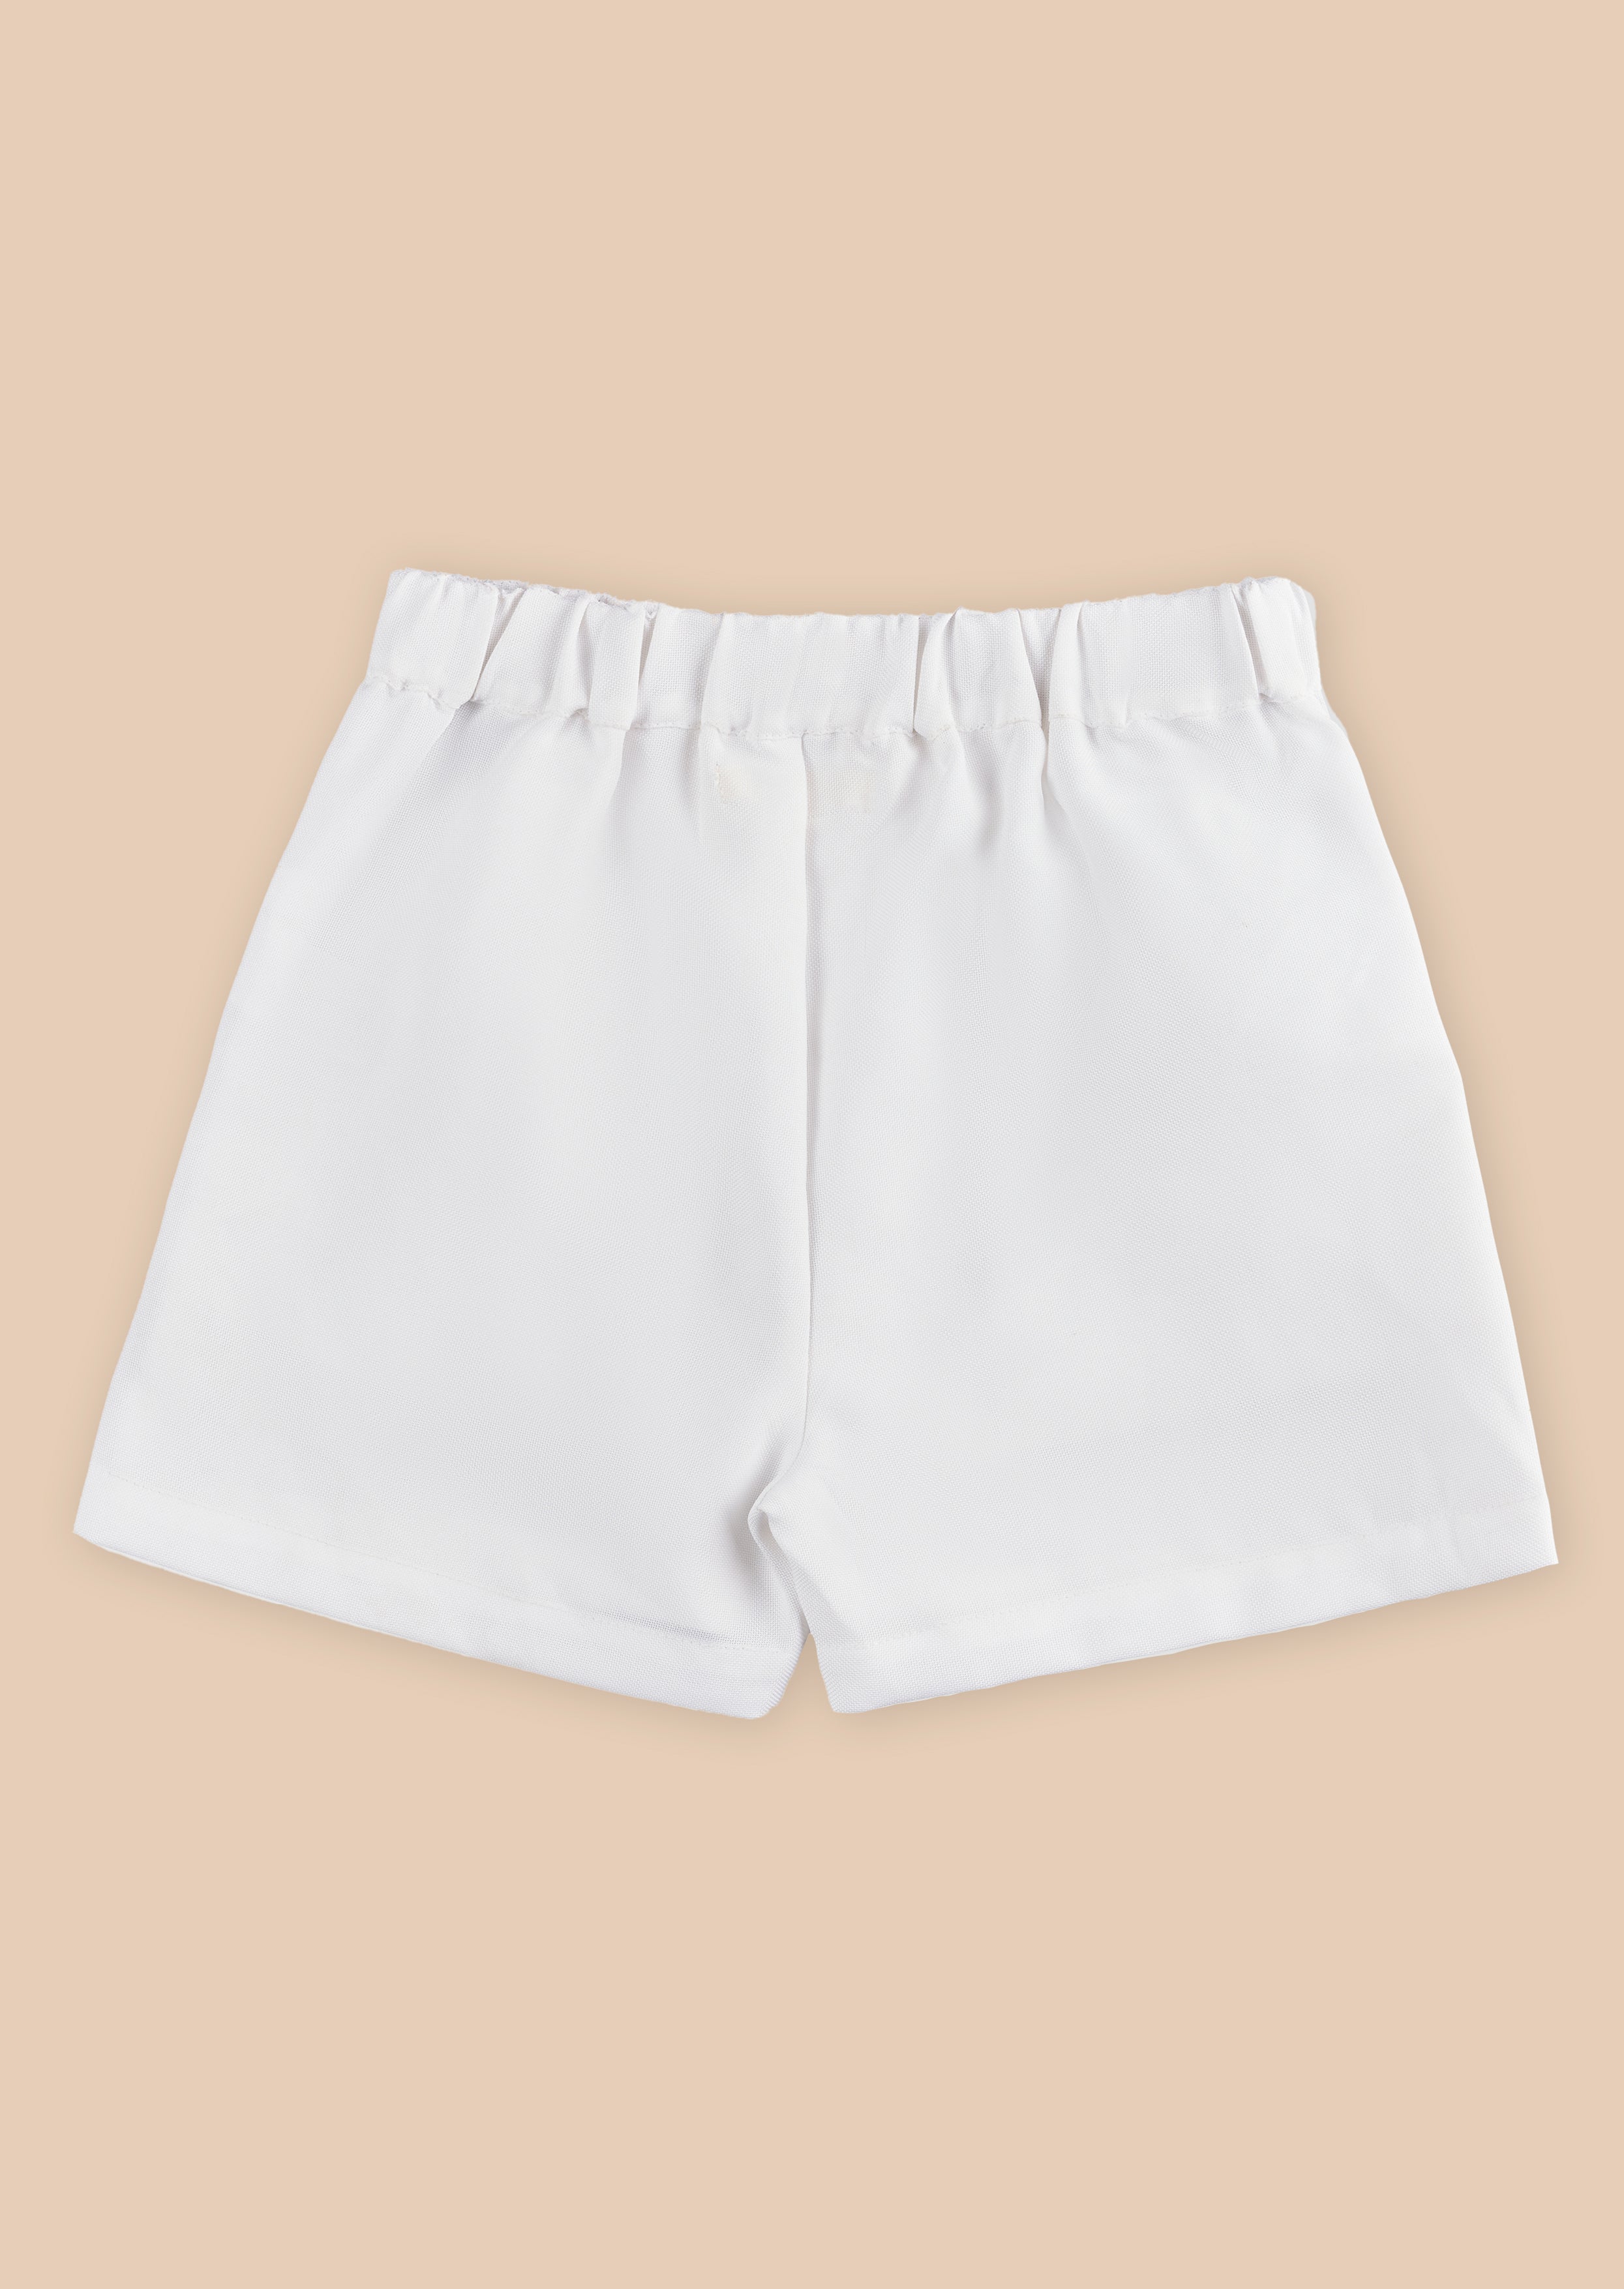 Girls Solid White Woven Shorts